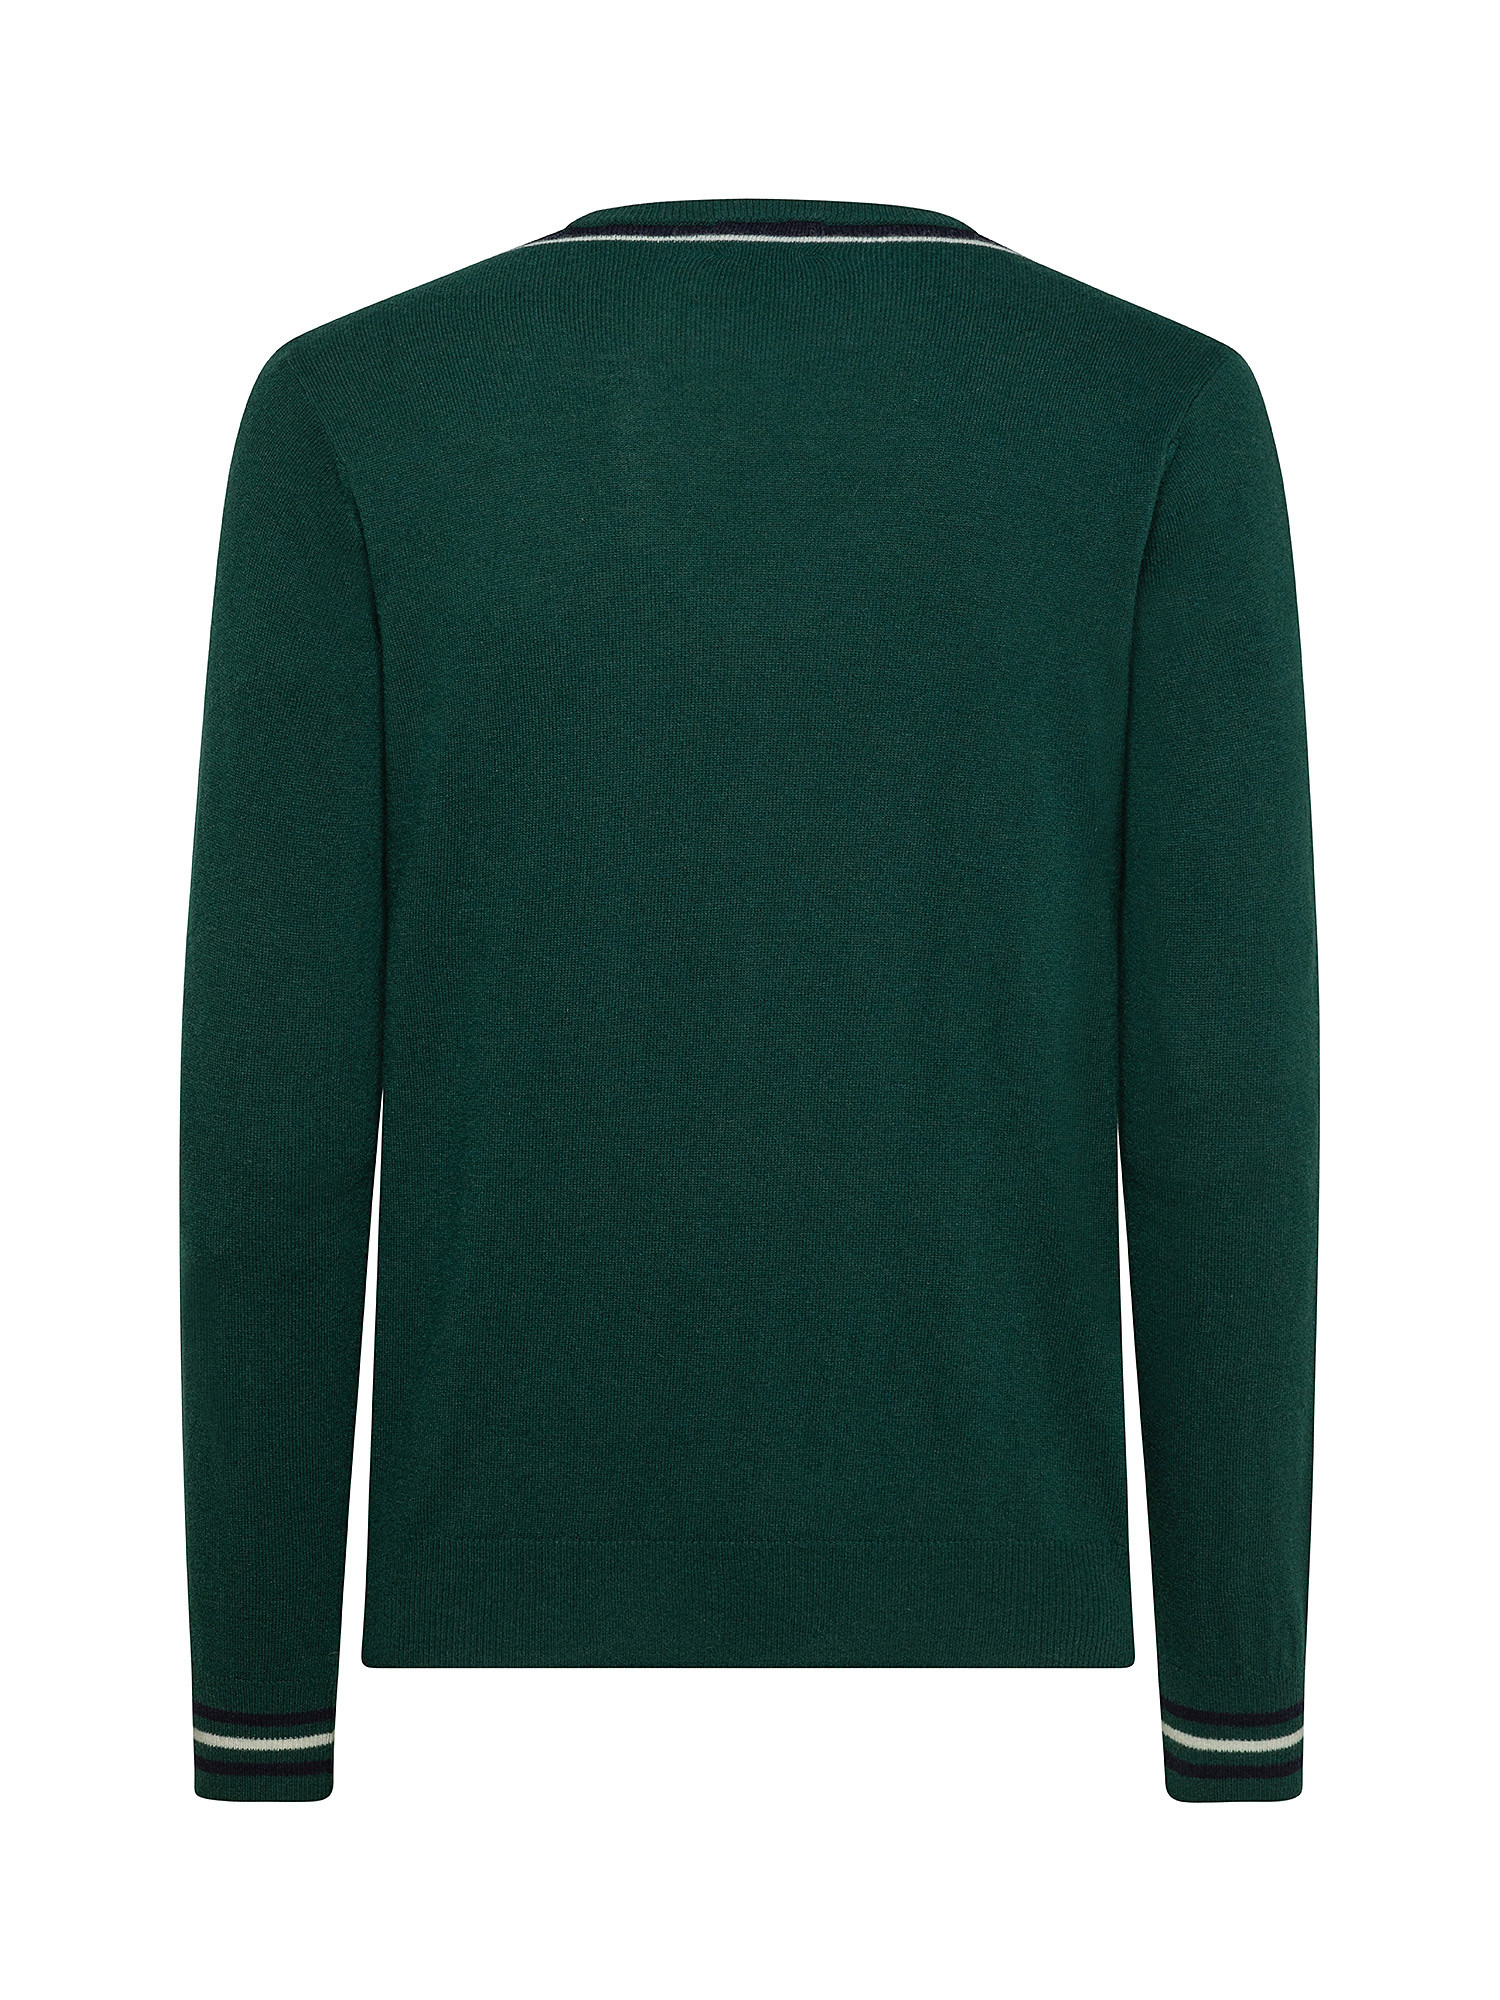 Crewneck sweater with Blend cashmere insert, Green, large image number 1